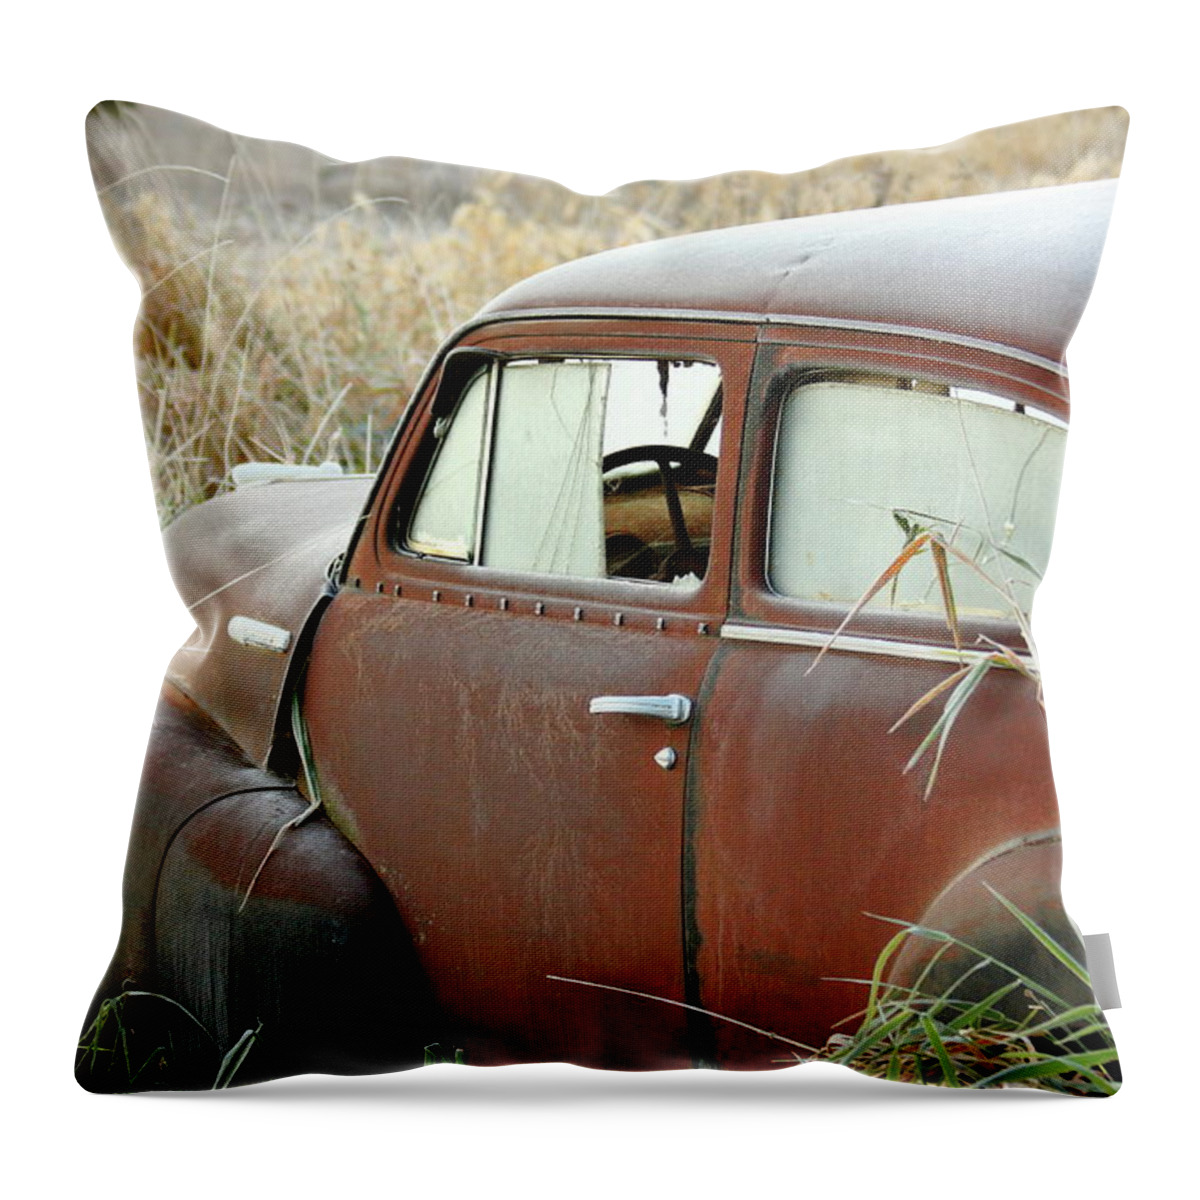 Chevrolet Throw Pillow featuring the photograph Out To Pasture by Lens Art Photography By Larry Trager